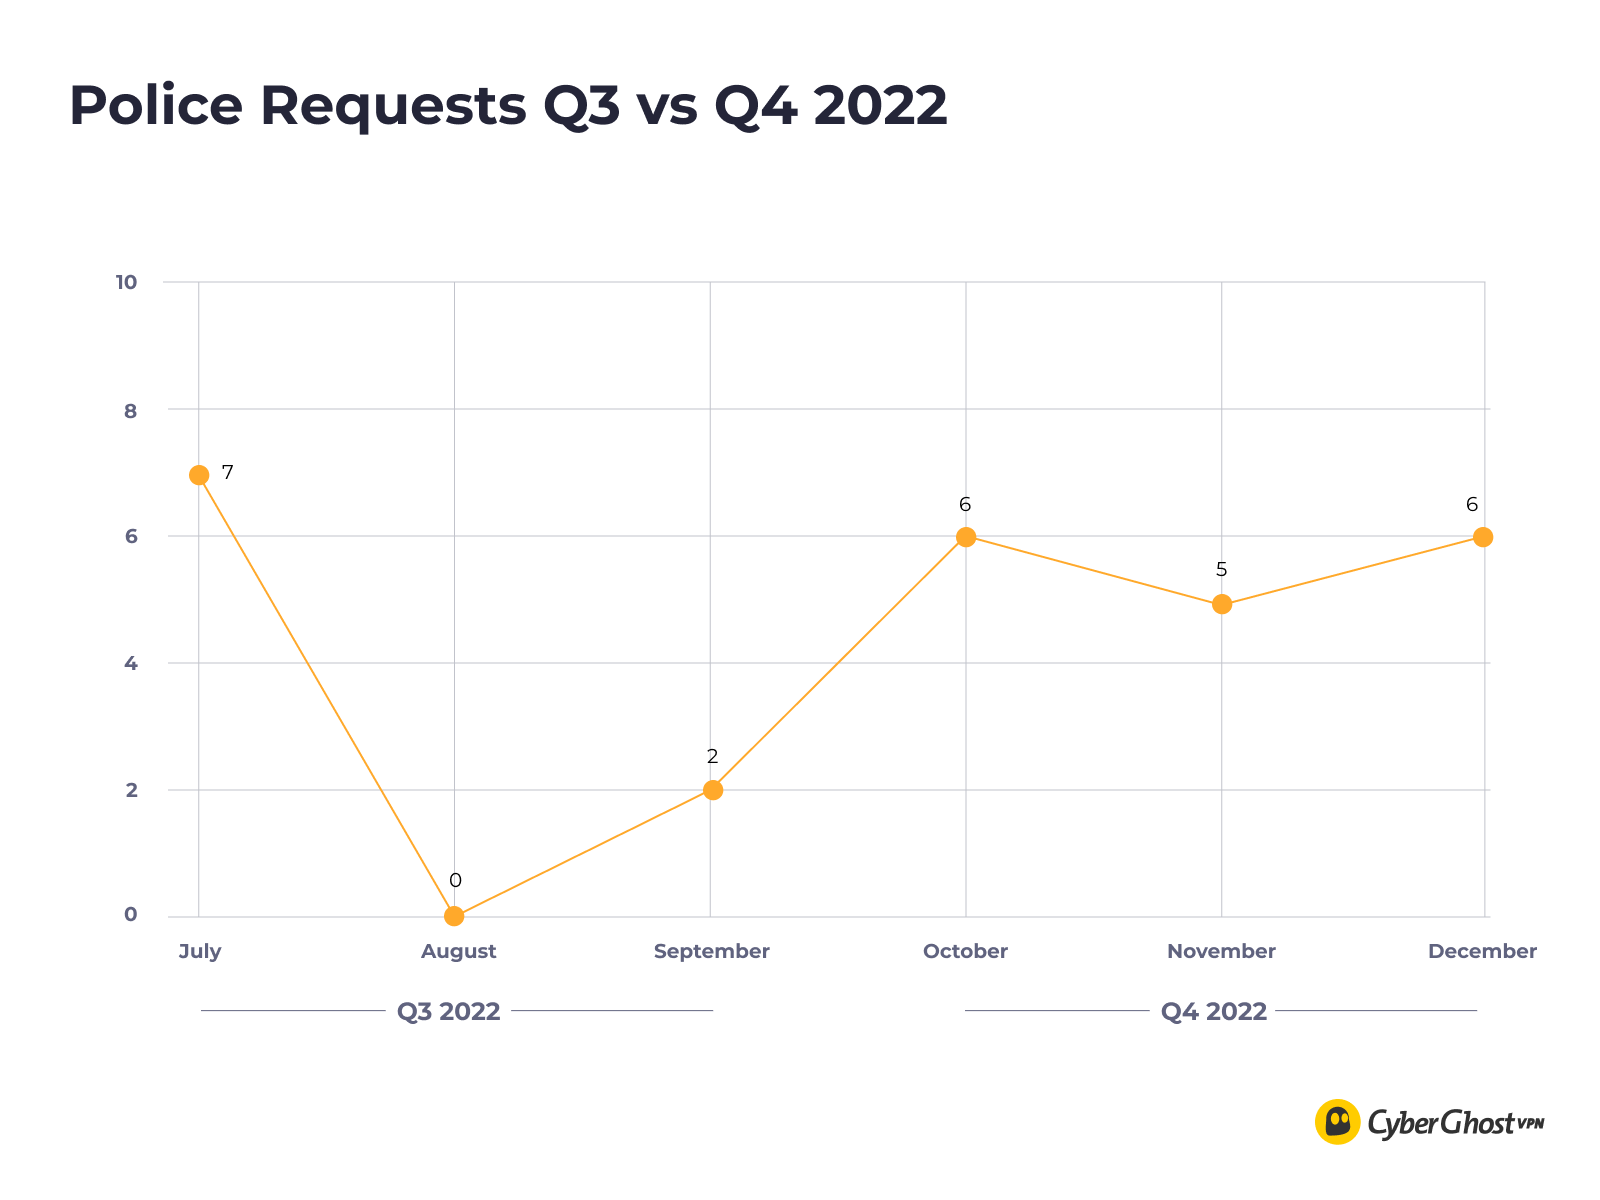 CyberGhost VPN's Quarterly Transparency Report numbers for Police Requests Q4 2022